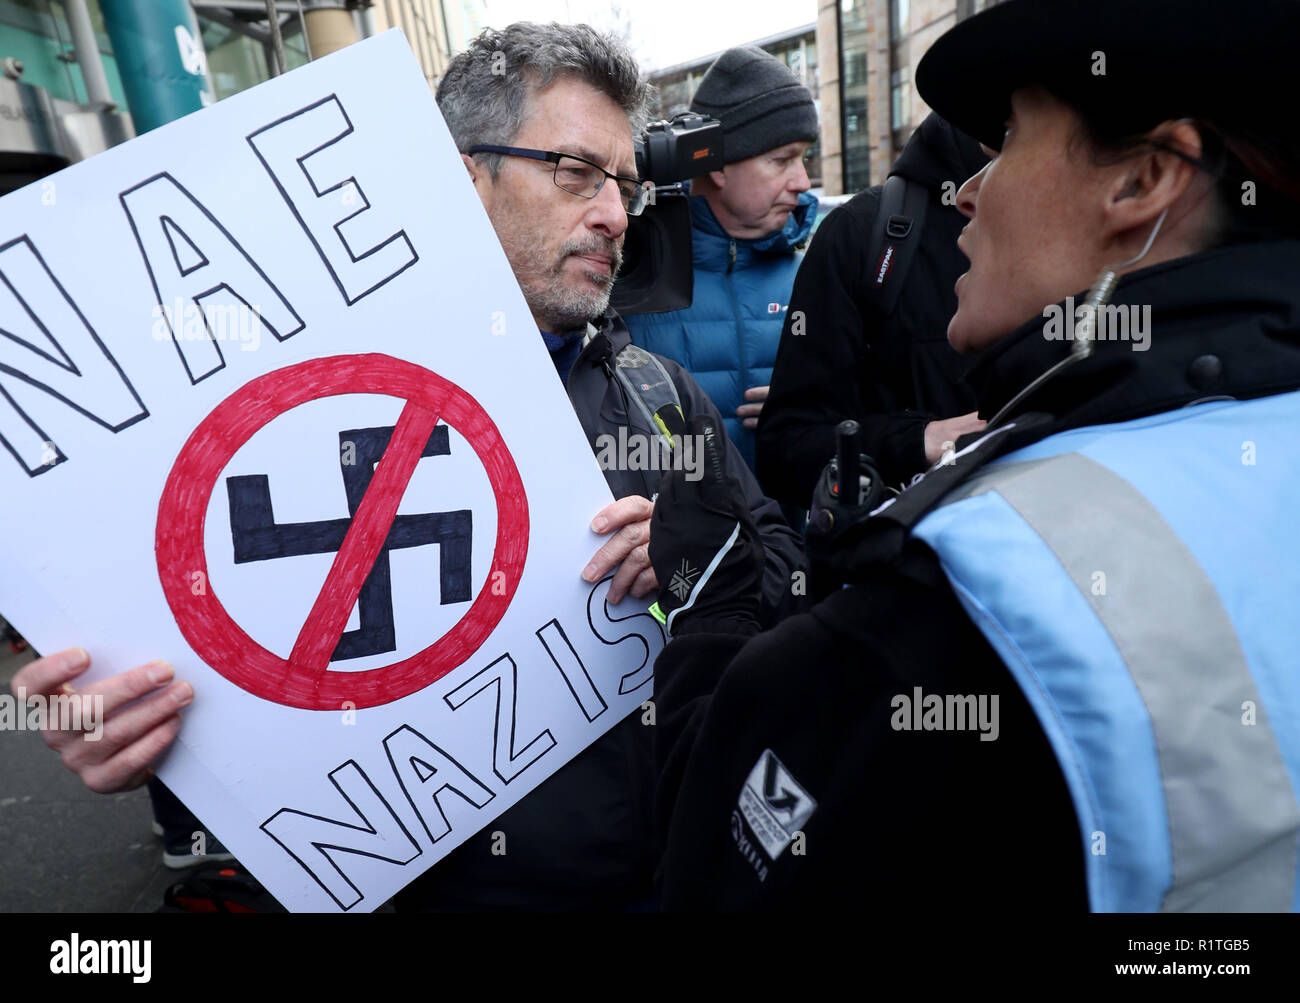 An anti-racism protester outside Edinburgh International Conference Centre, where former White House advisor, Steve Bannon is speaking at the European Broadcasting Union's News Xchange event. Stock Photo